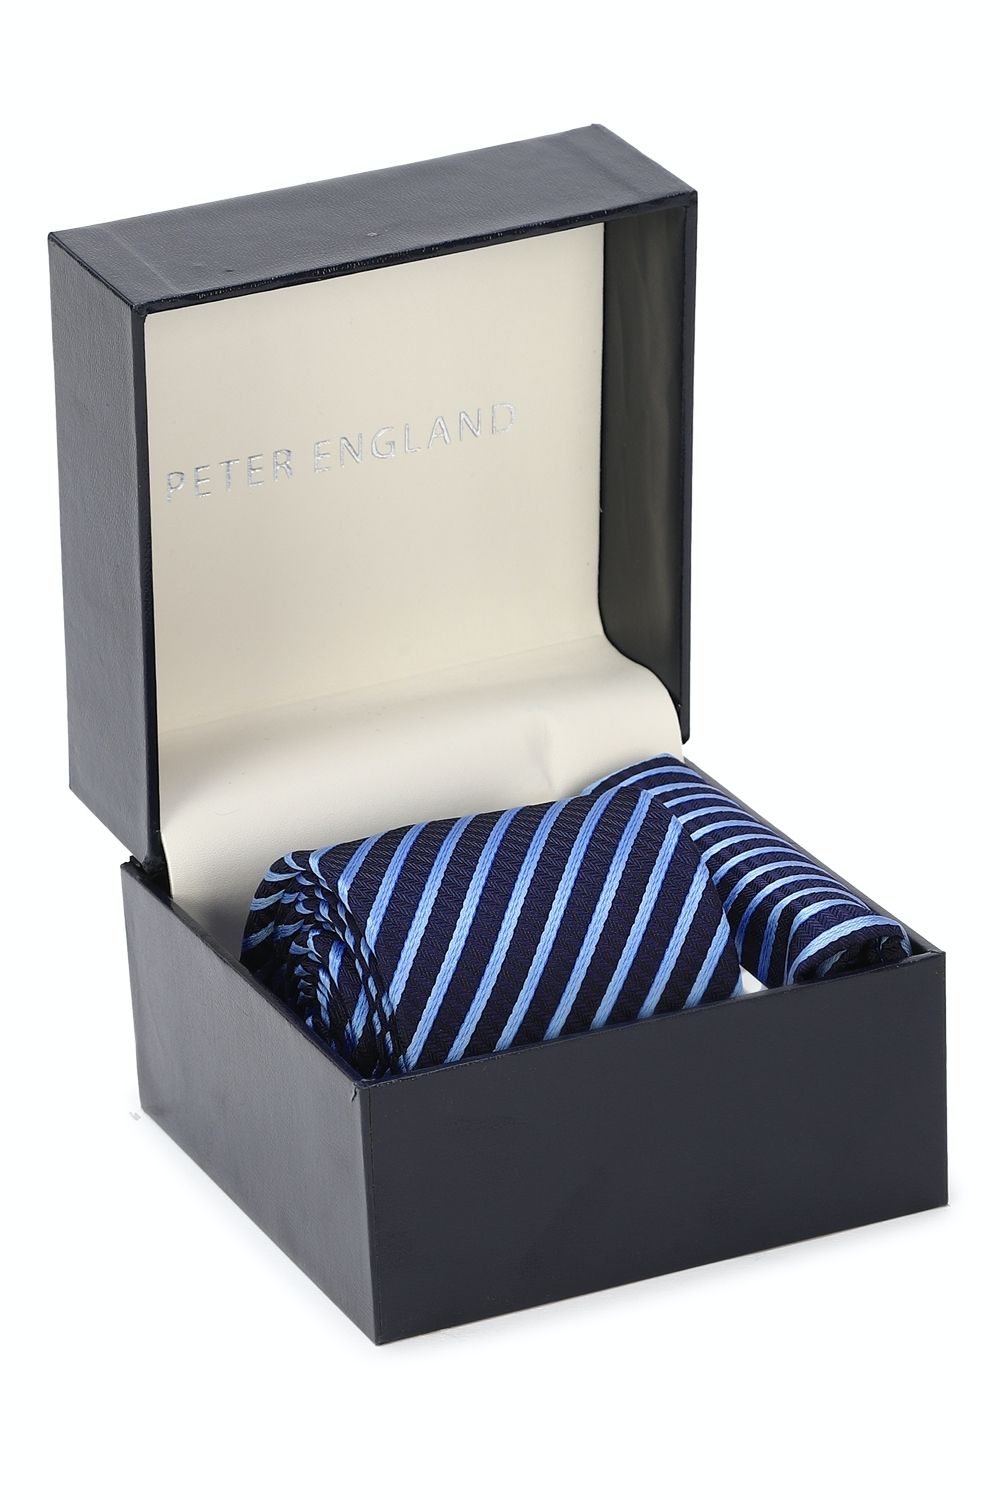 Peter England Navy Blue Tie and Pocket Square: Buy Peter England Navy Blue  Tie and Pocket Square Online at Best Price in India